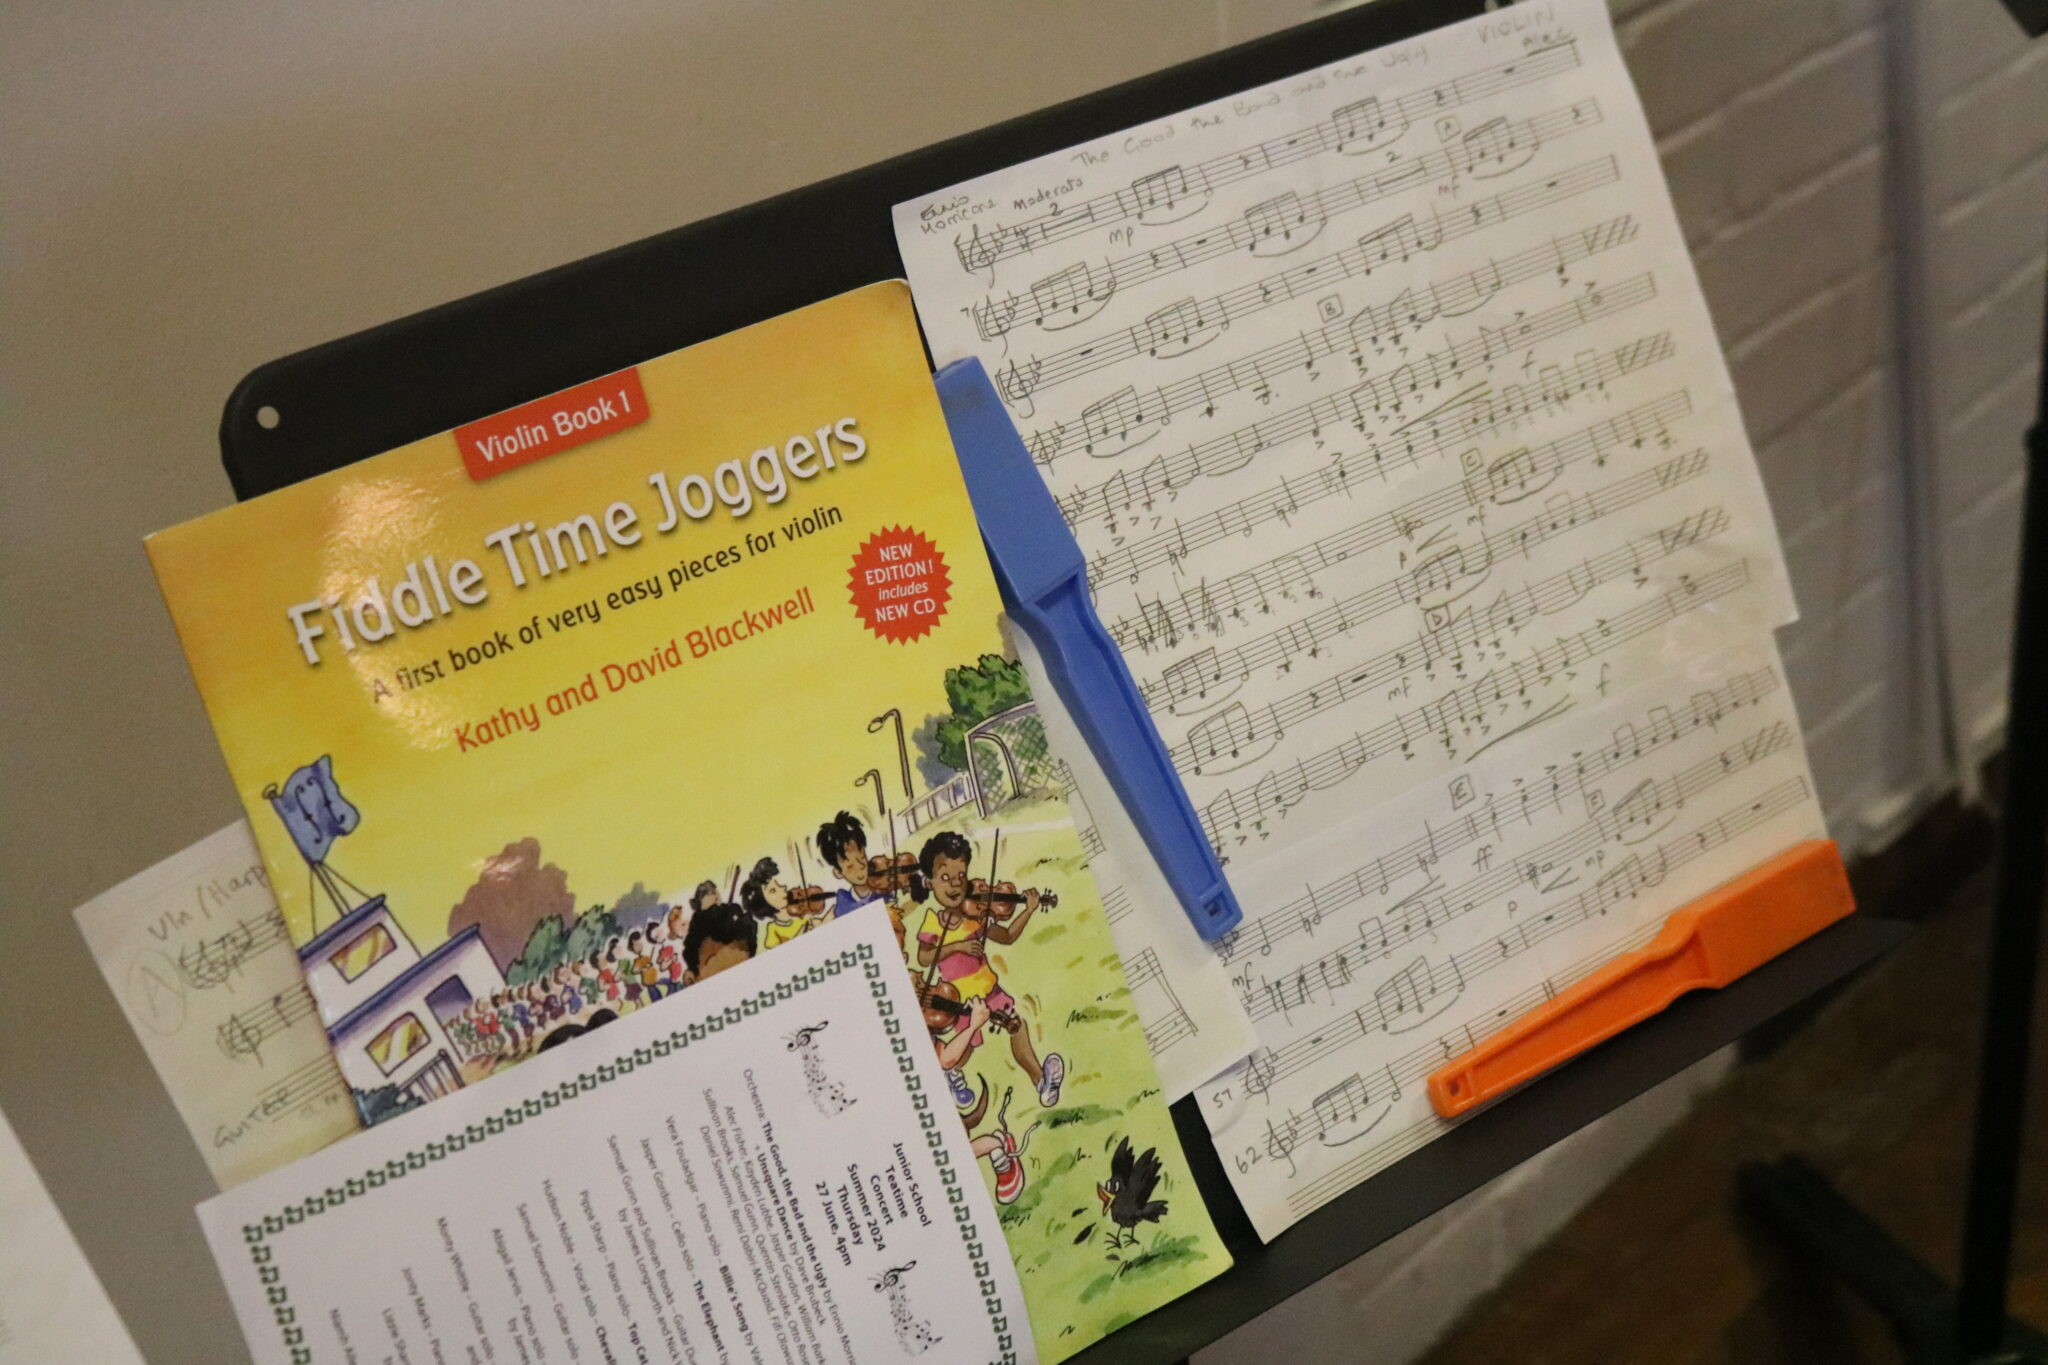 Fiddle time joggers music book